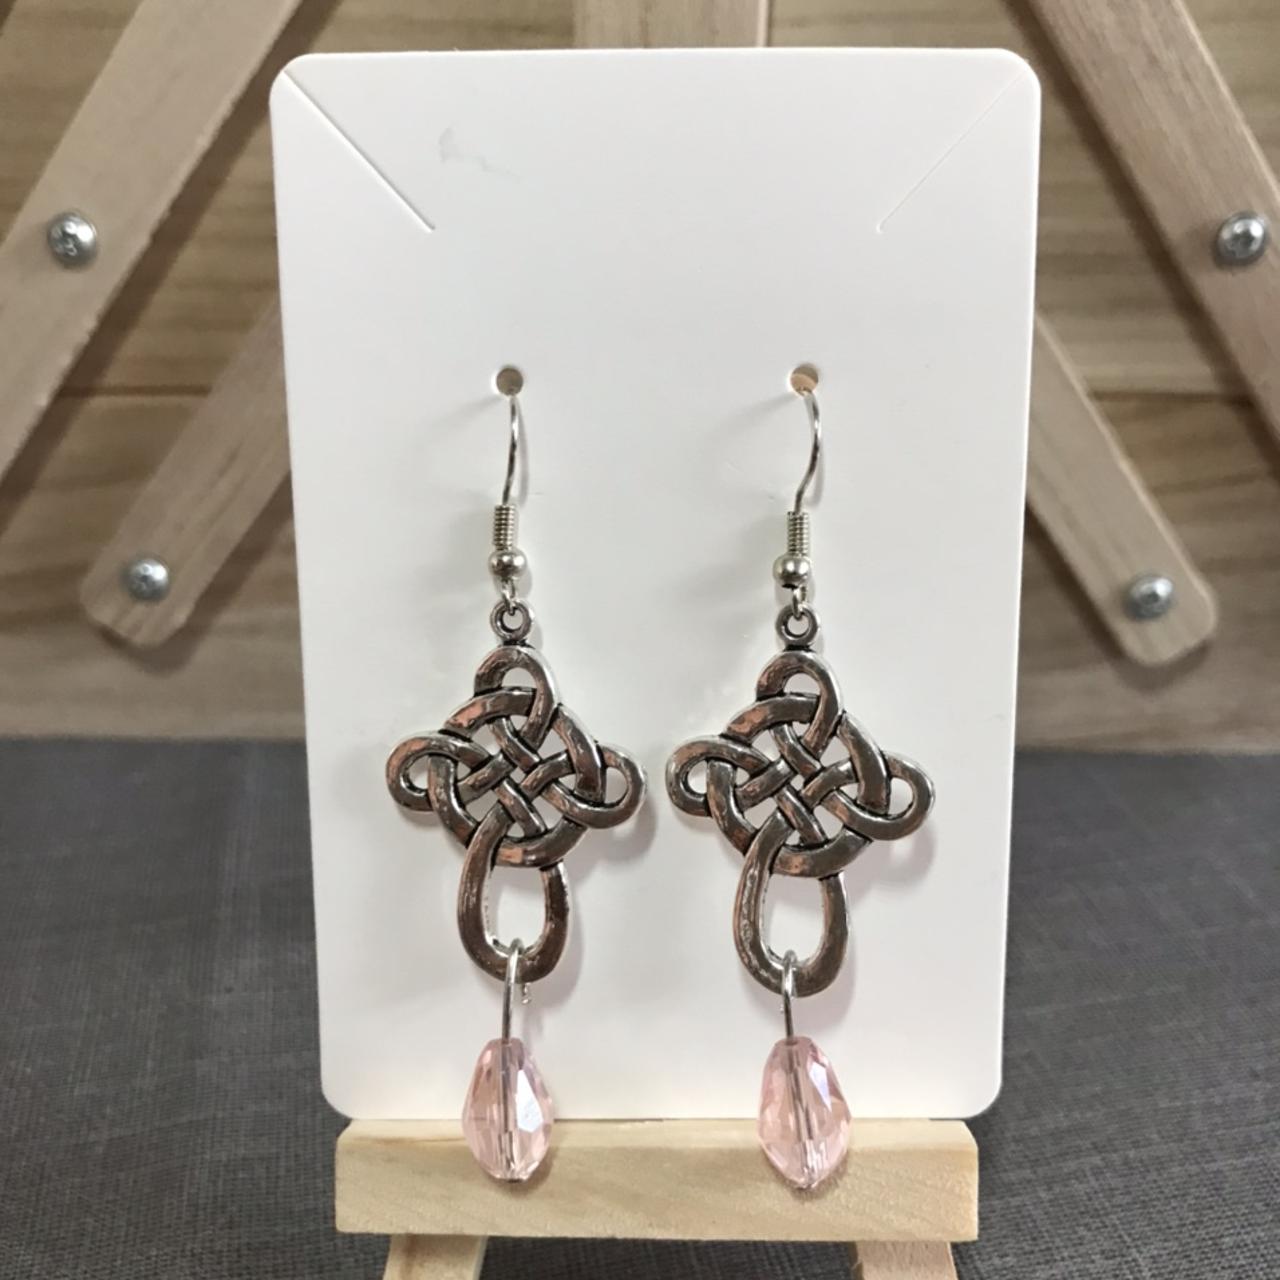 Women's Pink and Silver Jewellery